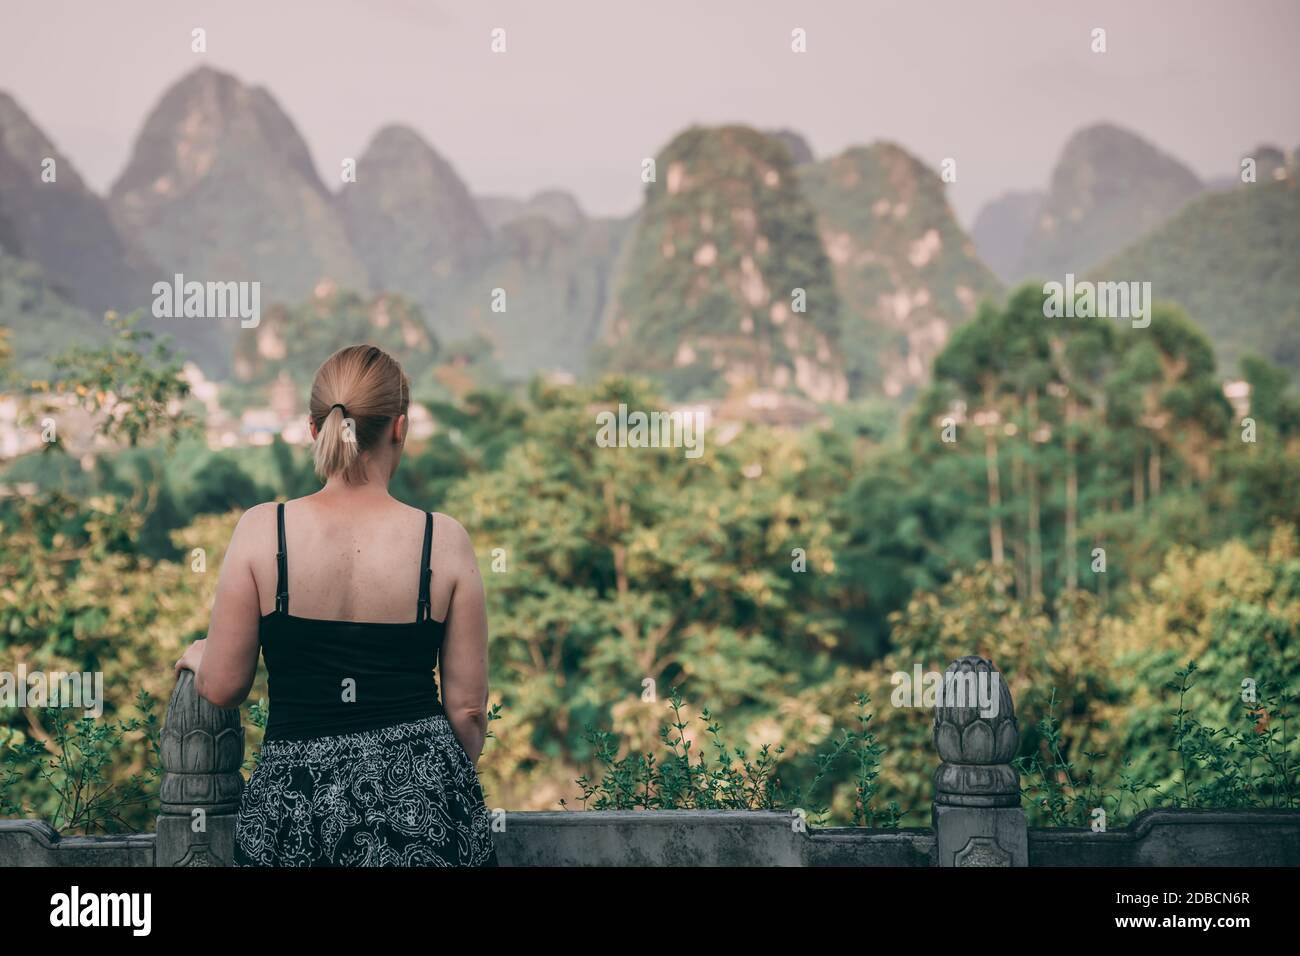 A beautiful mesmerizing picture of a female looking at the karts rocky foliage mountain scenery in Yangshuo, China Stock Photo